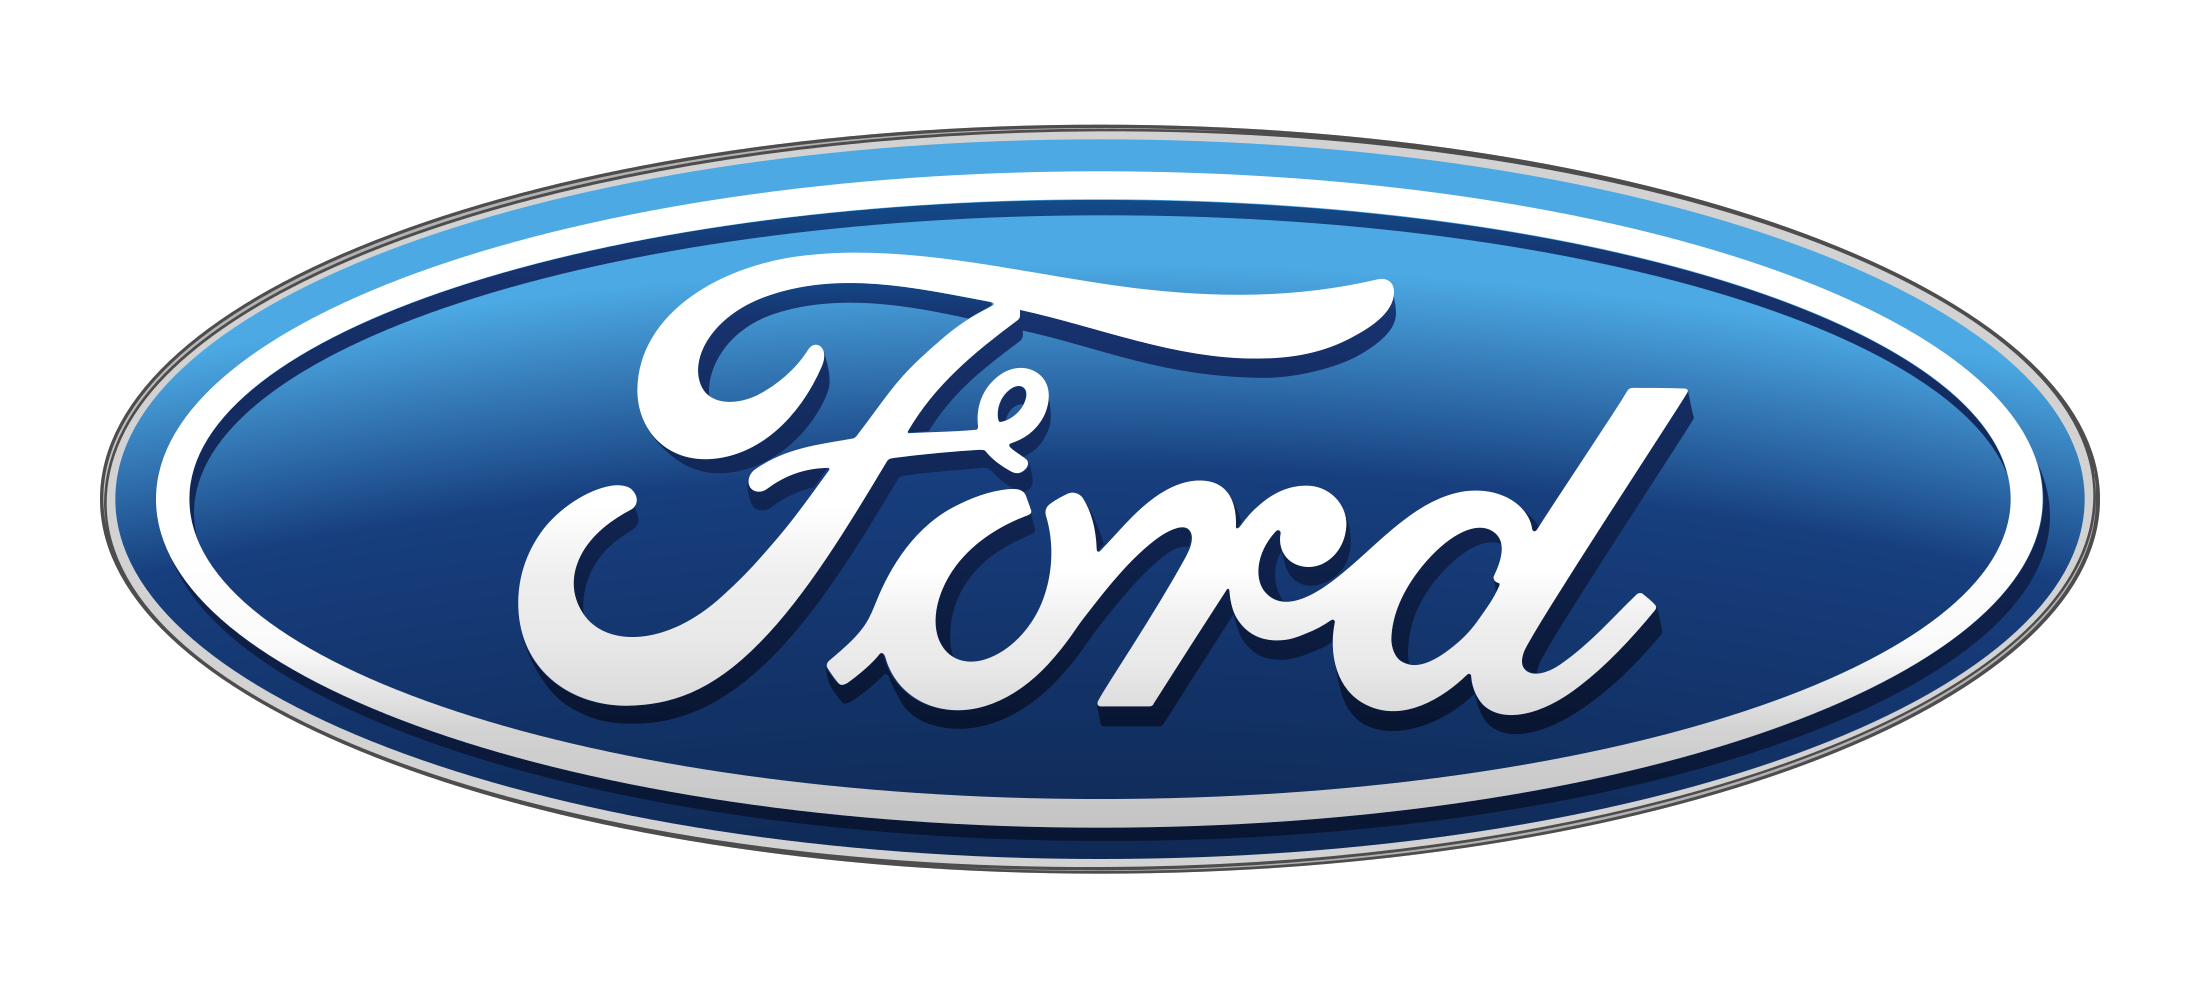 Ford логотип PNG